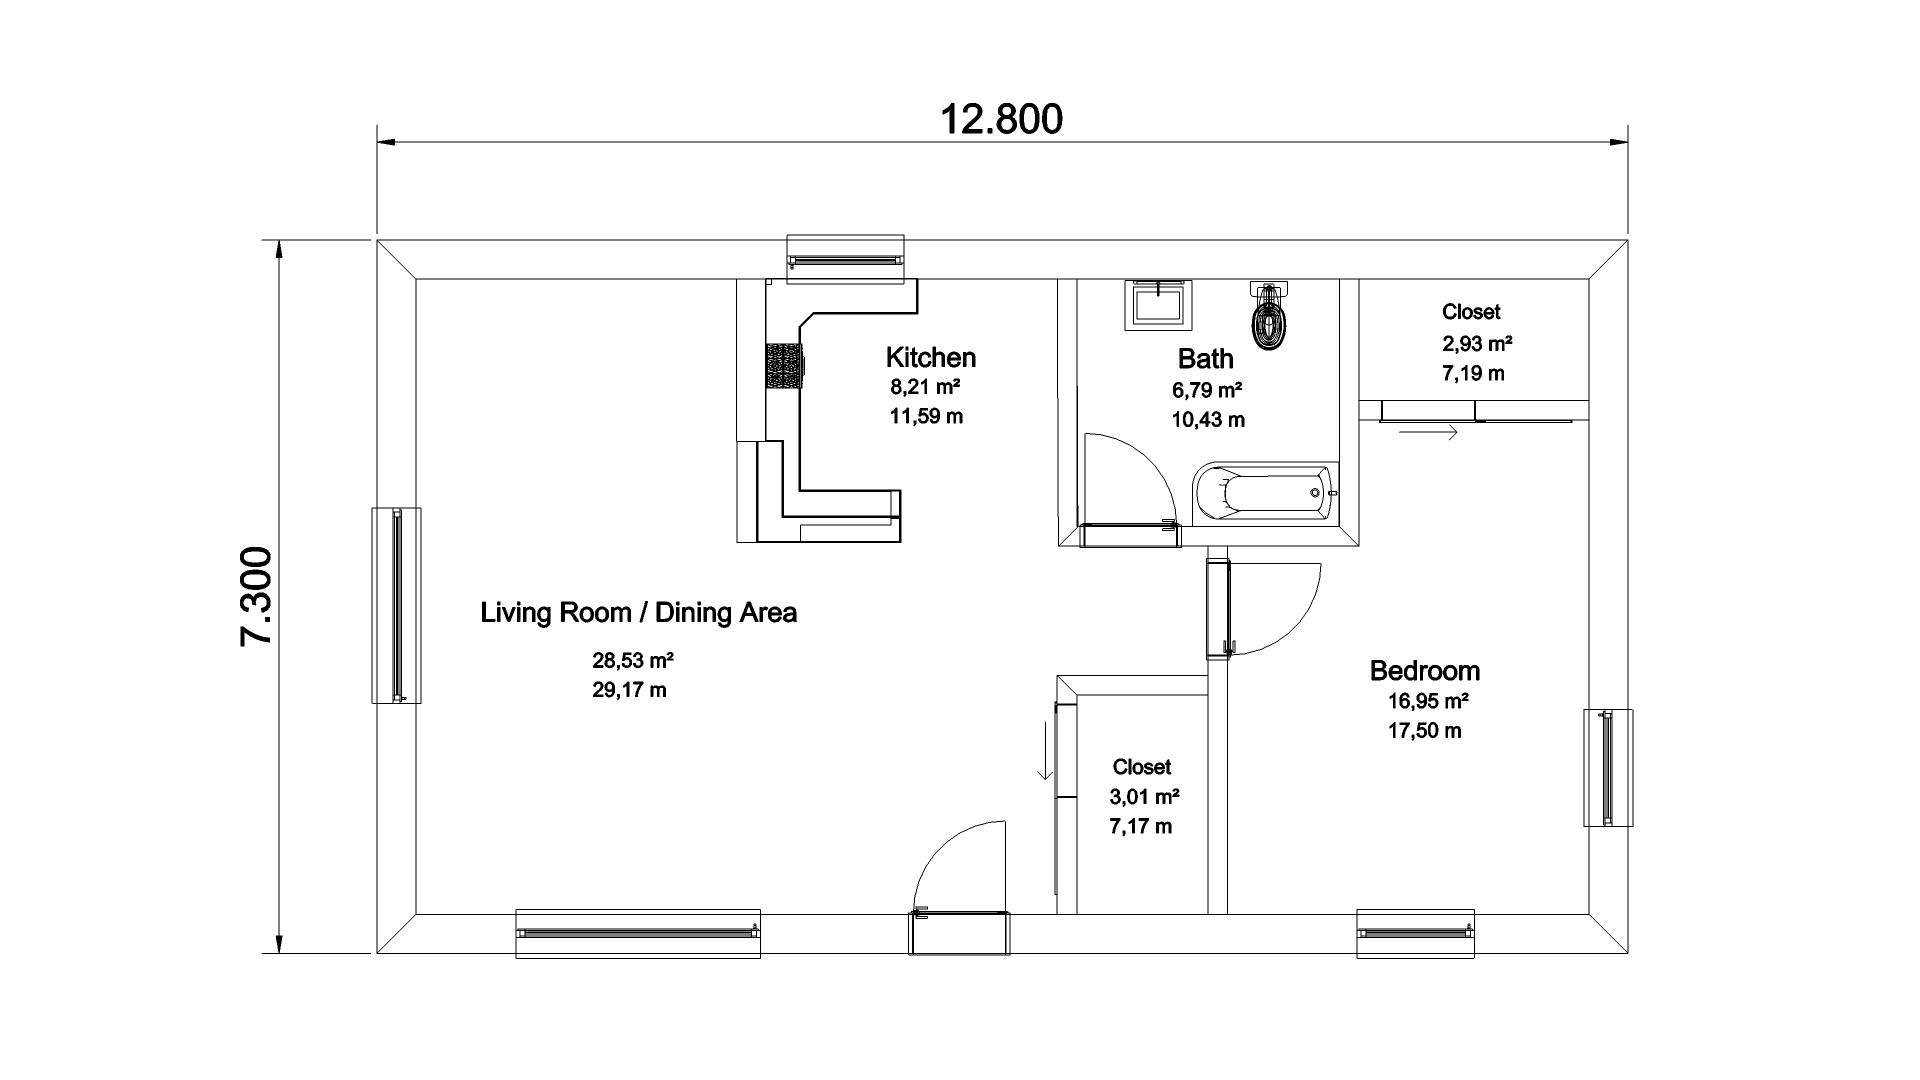 Creating Floor Plans for Real Estate Listings - pCon blog